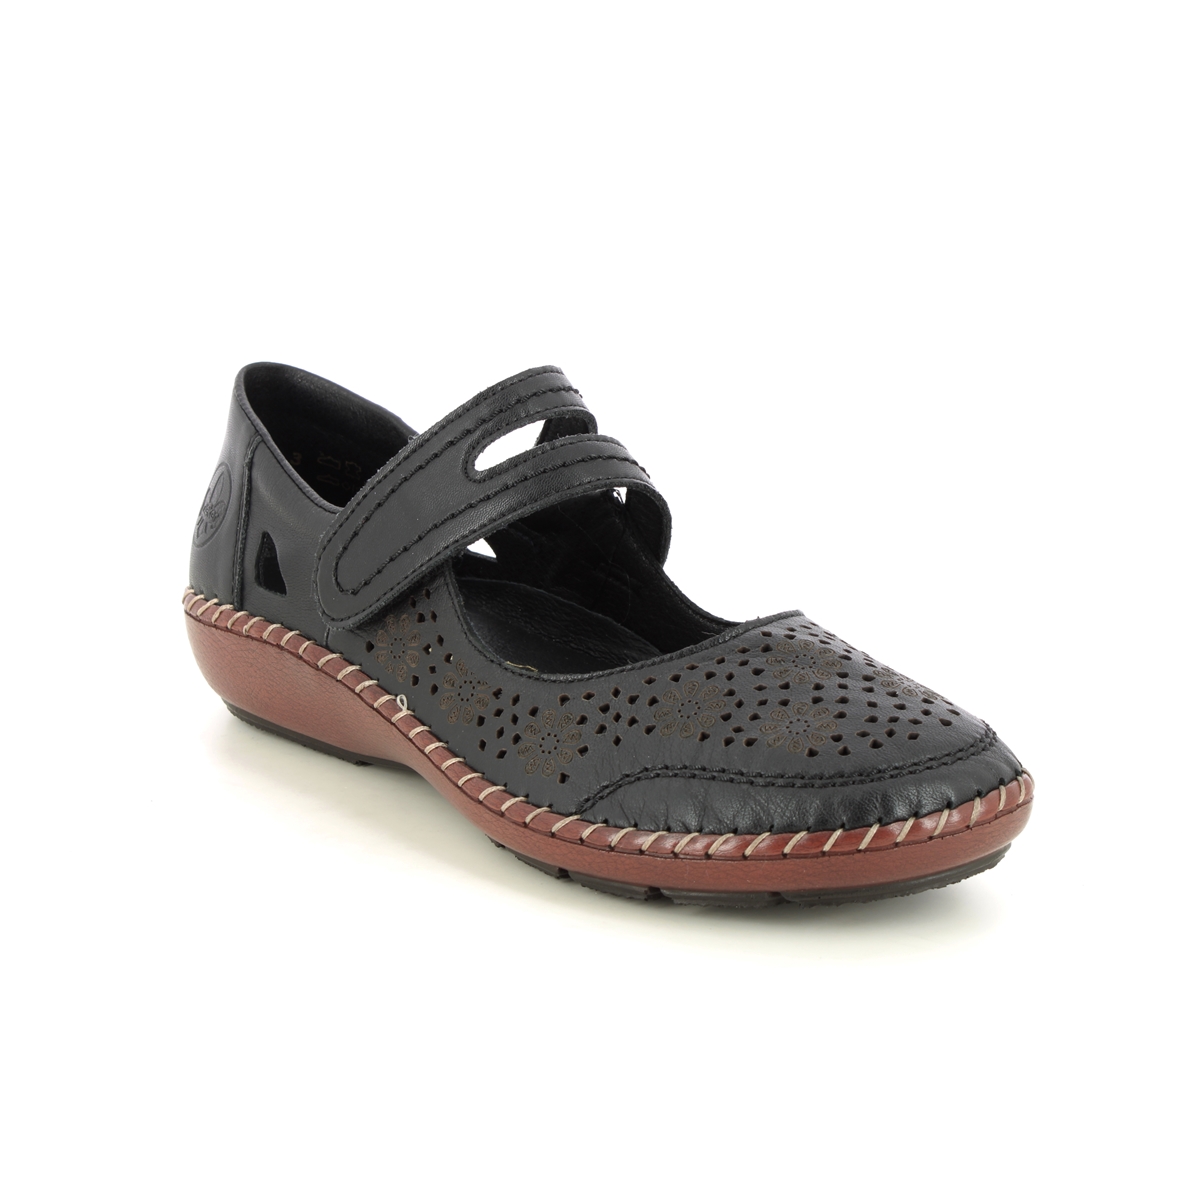 Rieker 44875-00 Black Womens Mary Jane Shoes in a Plain Leather in Size 37